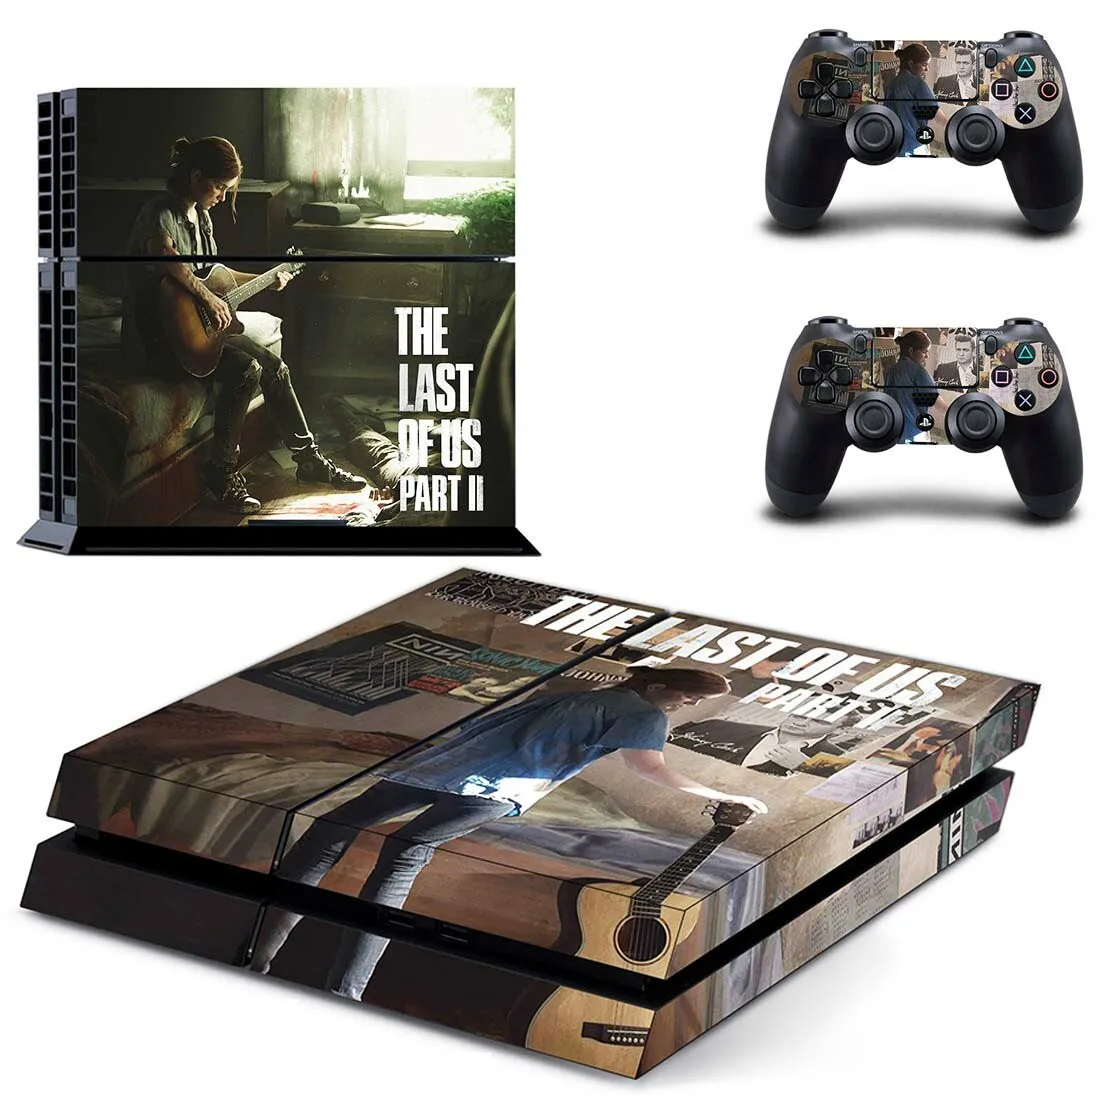 

The last of us PS4 Skin Sticker for Playstation 4 Console & 2 Controllers Decal Vinyl Protective Skins Style 1